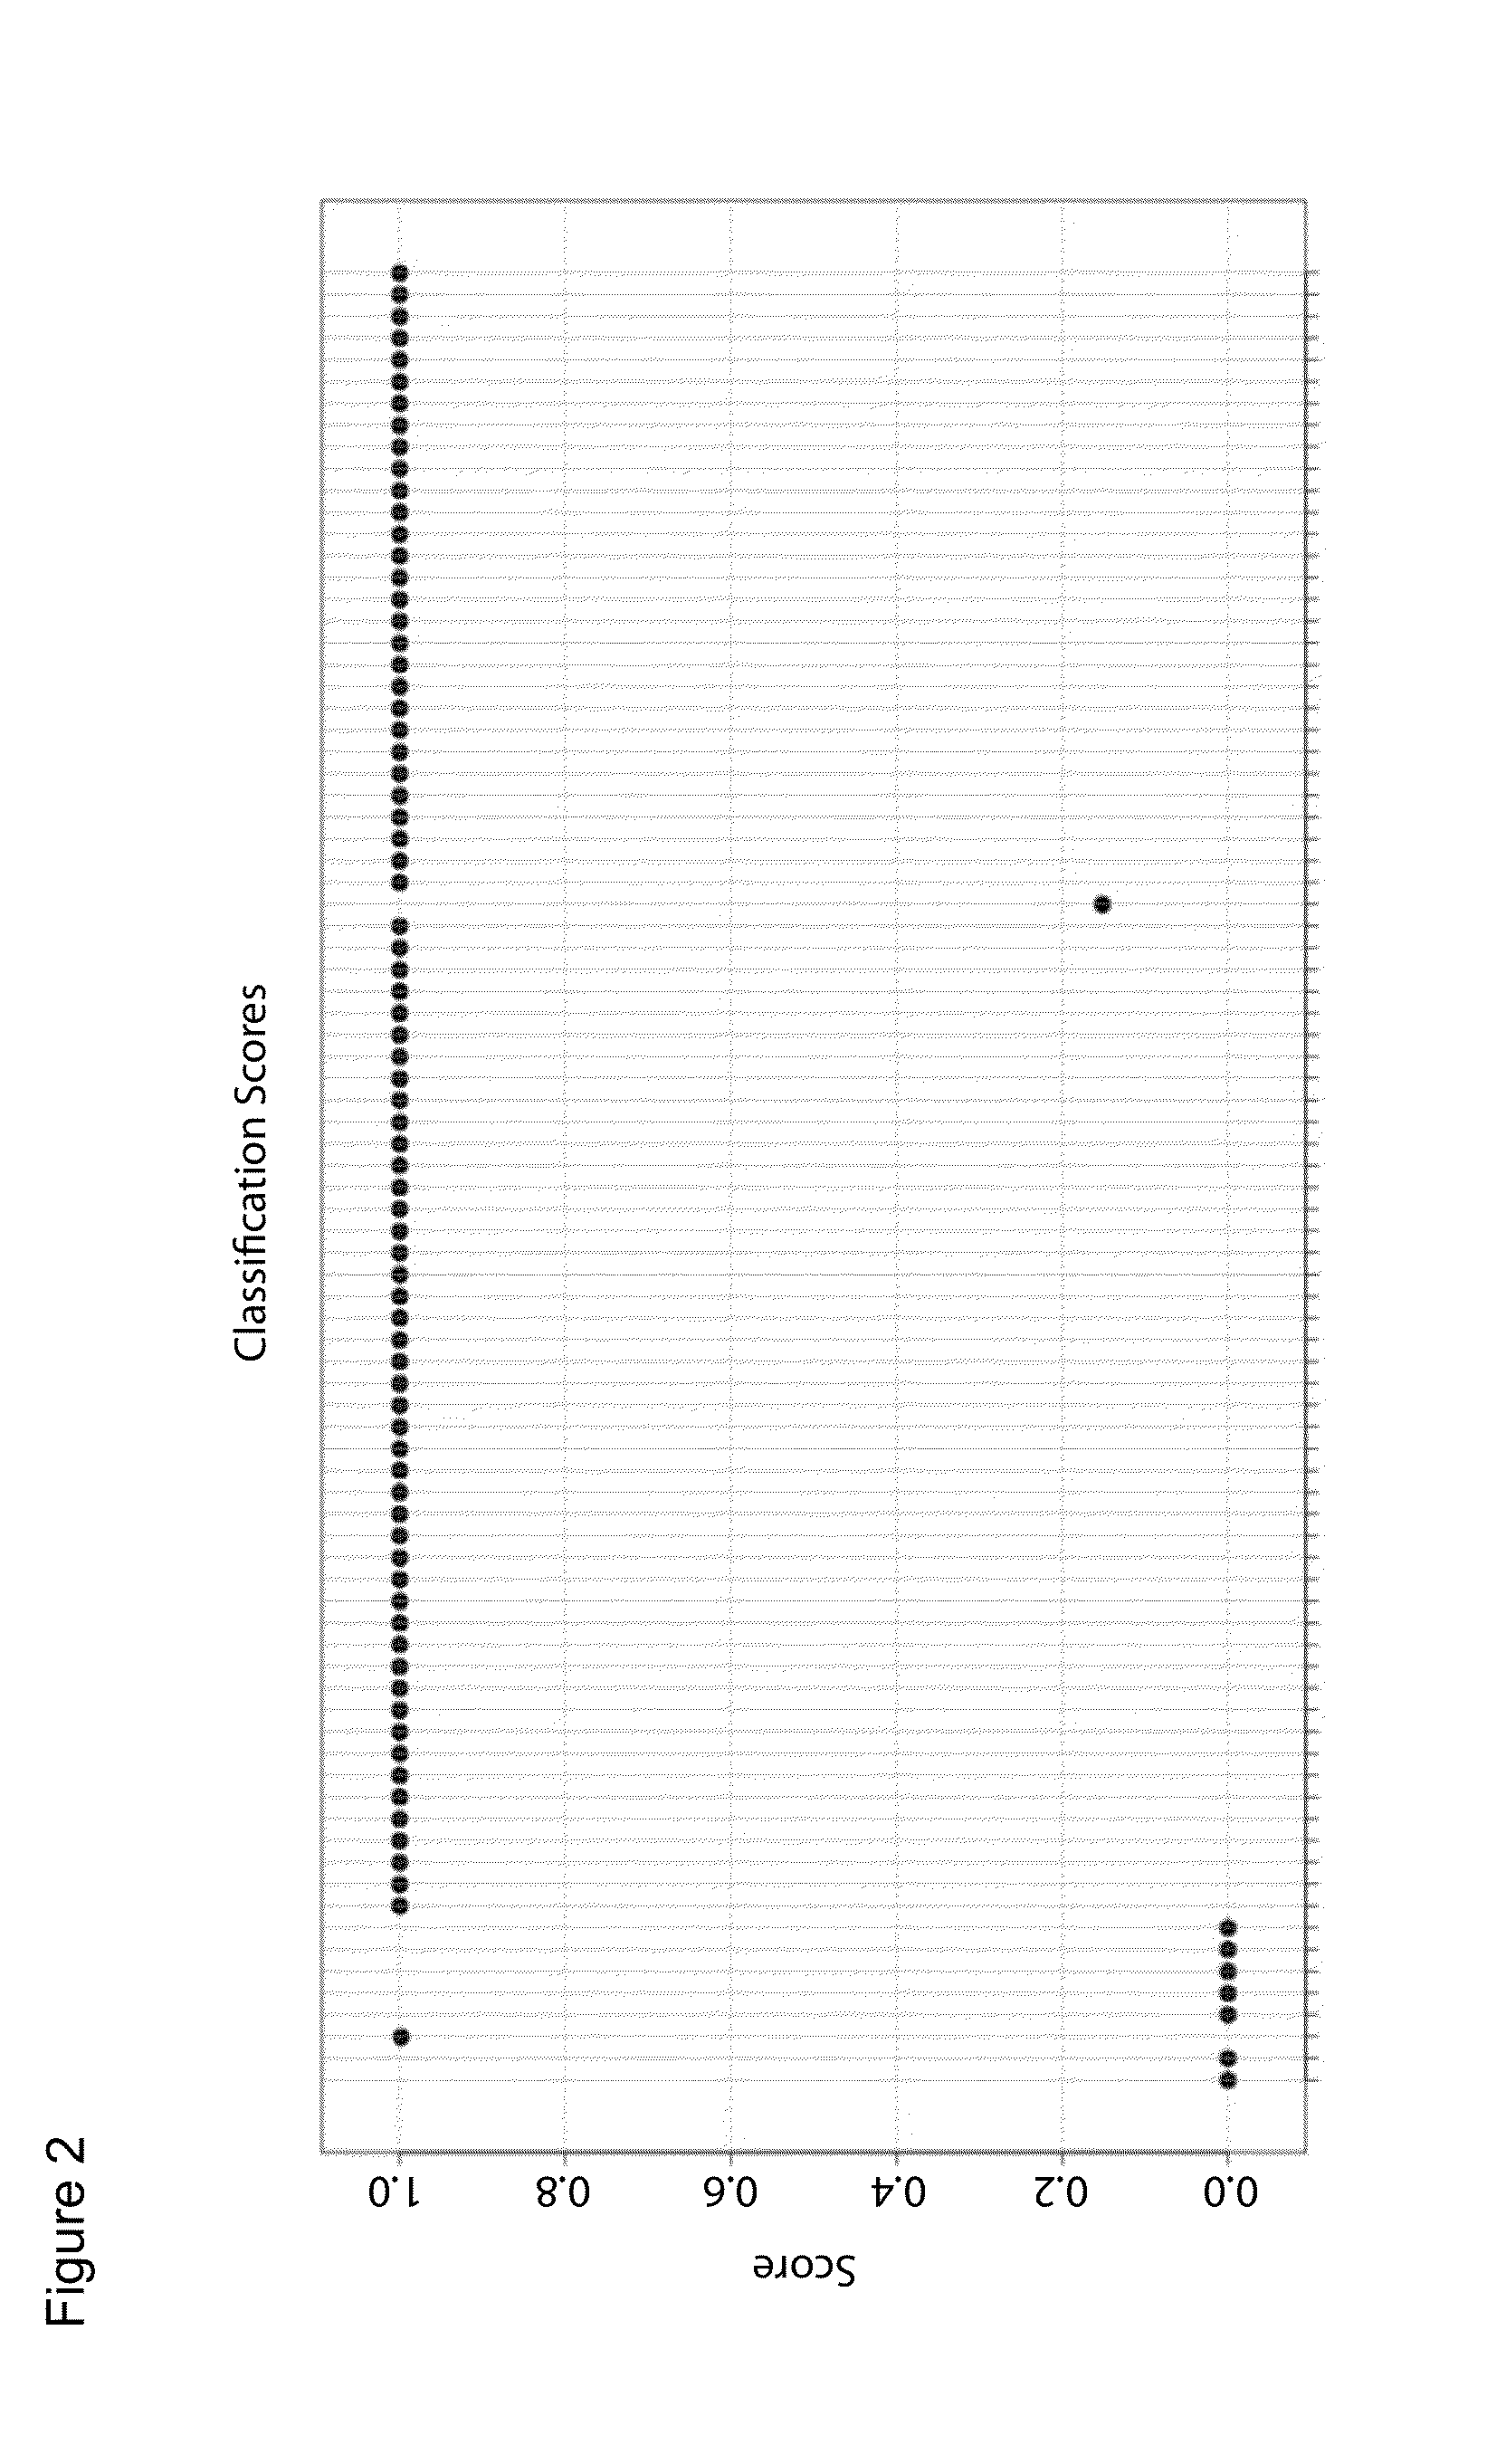 Biomarkers for diagnosis of lung diseases and methods of use thereof